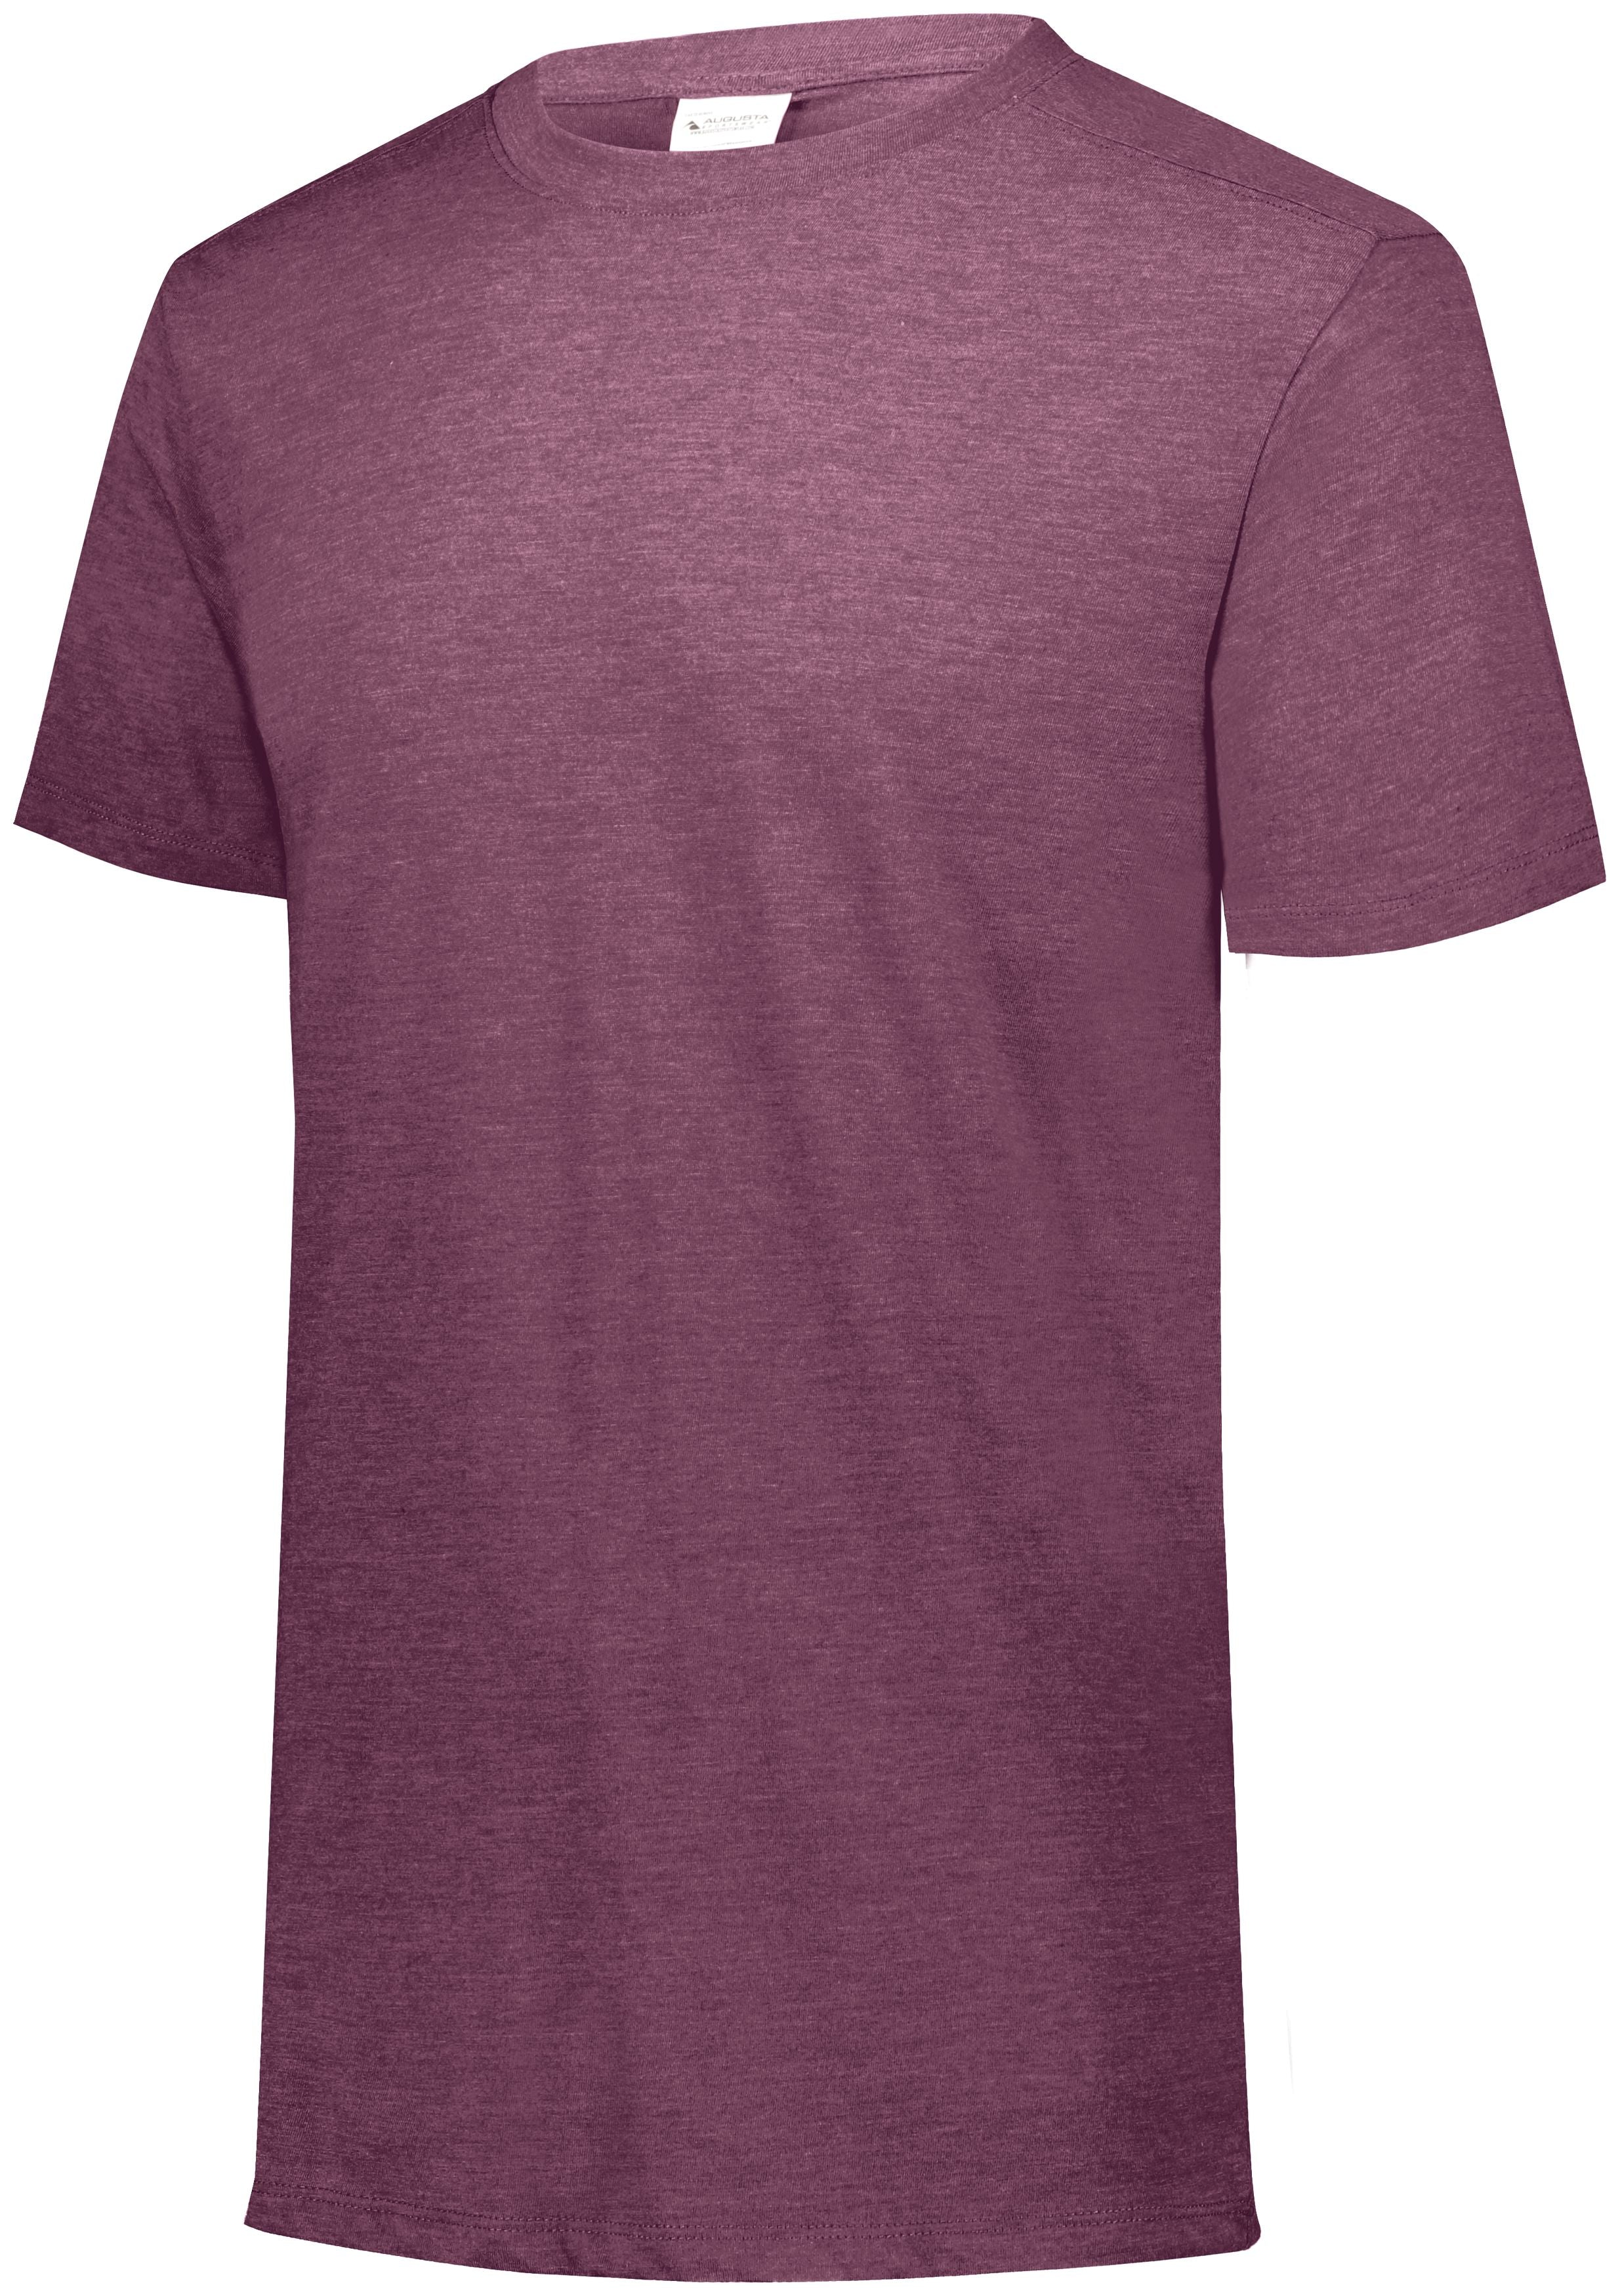 Augusta Sportswear Youth Tri-Blend T-Shirt in Maroon Heather  -Part of the Youth, Youth-Tee-Shirt, T-Shirts, Augusta-Products, Shirts product lines at KanaleyCreations.com